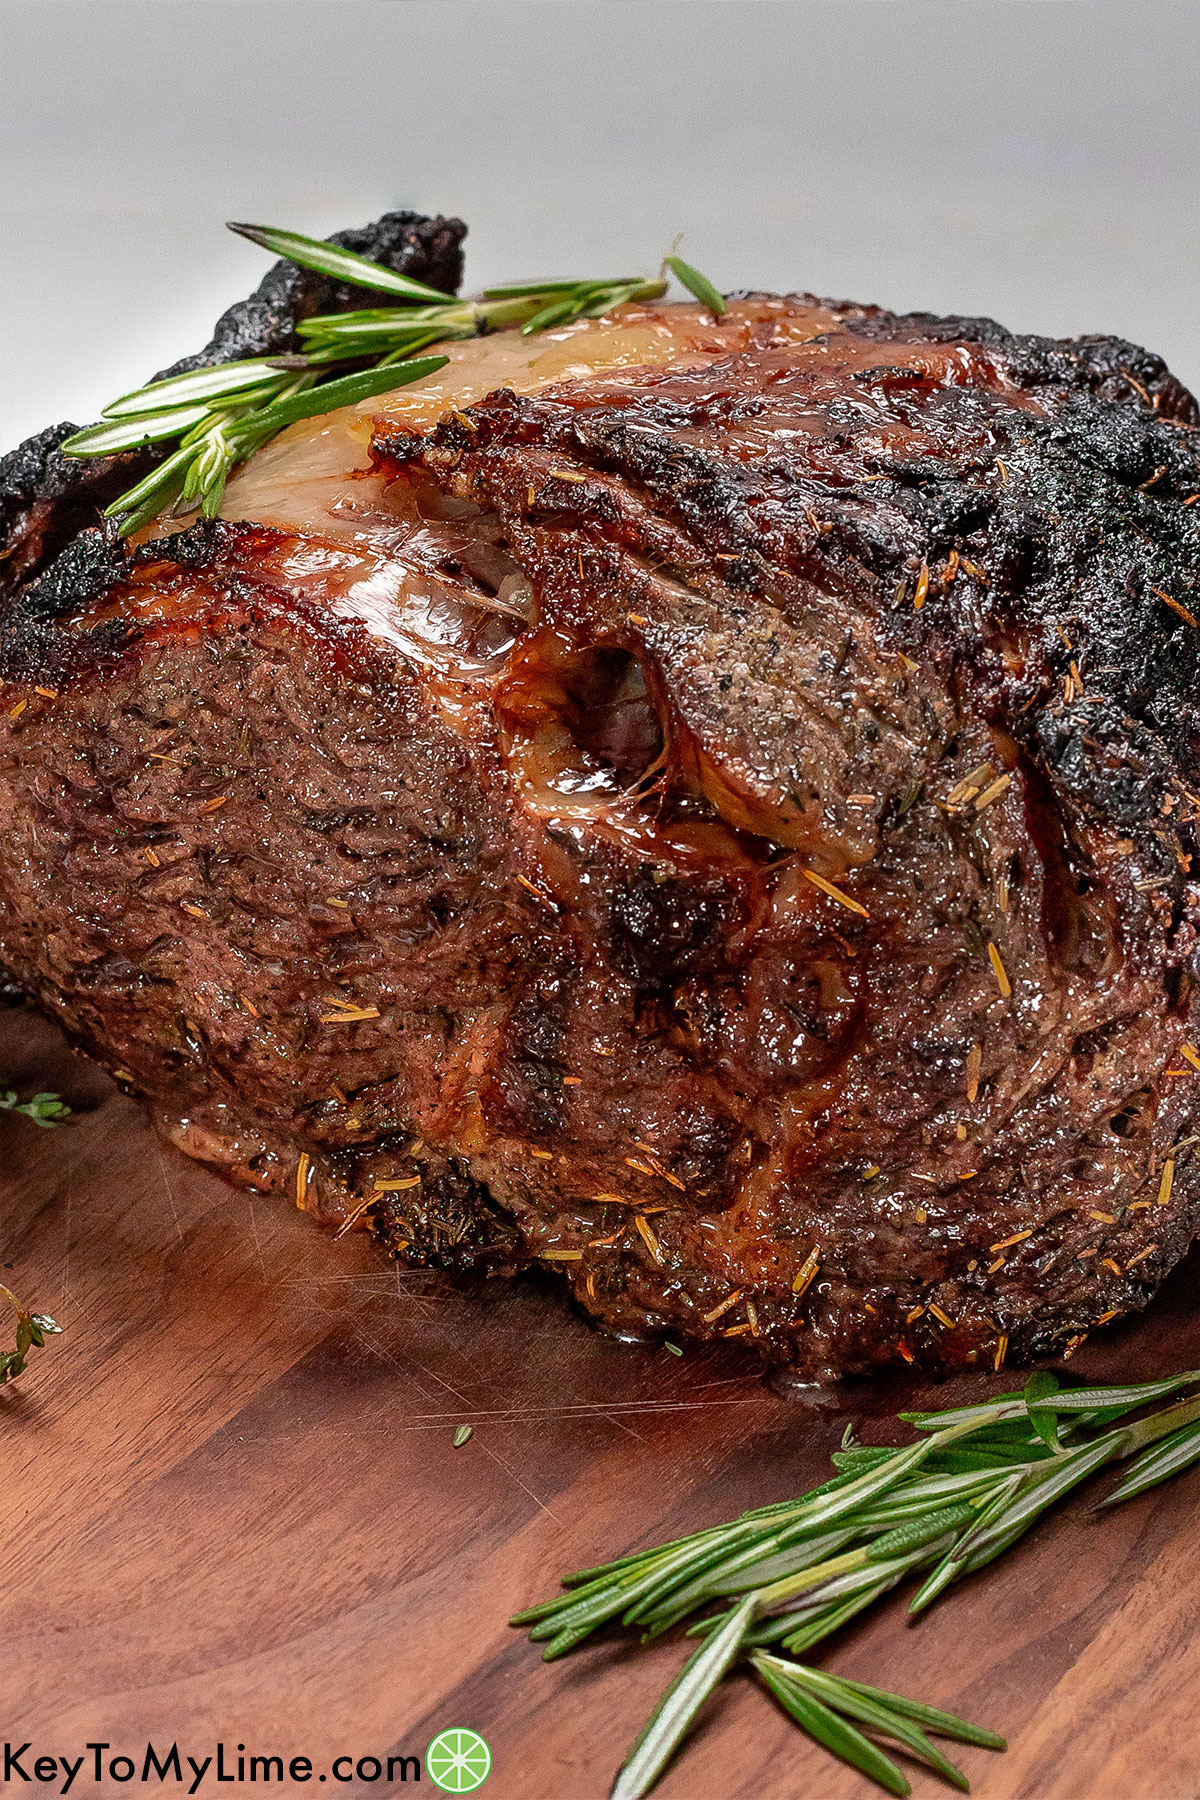 A side image showing the texture of the flavorful crispy crust on the beef roast.